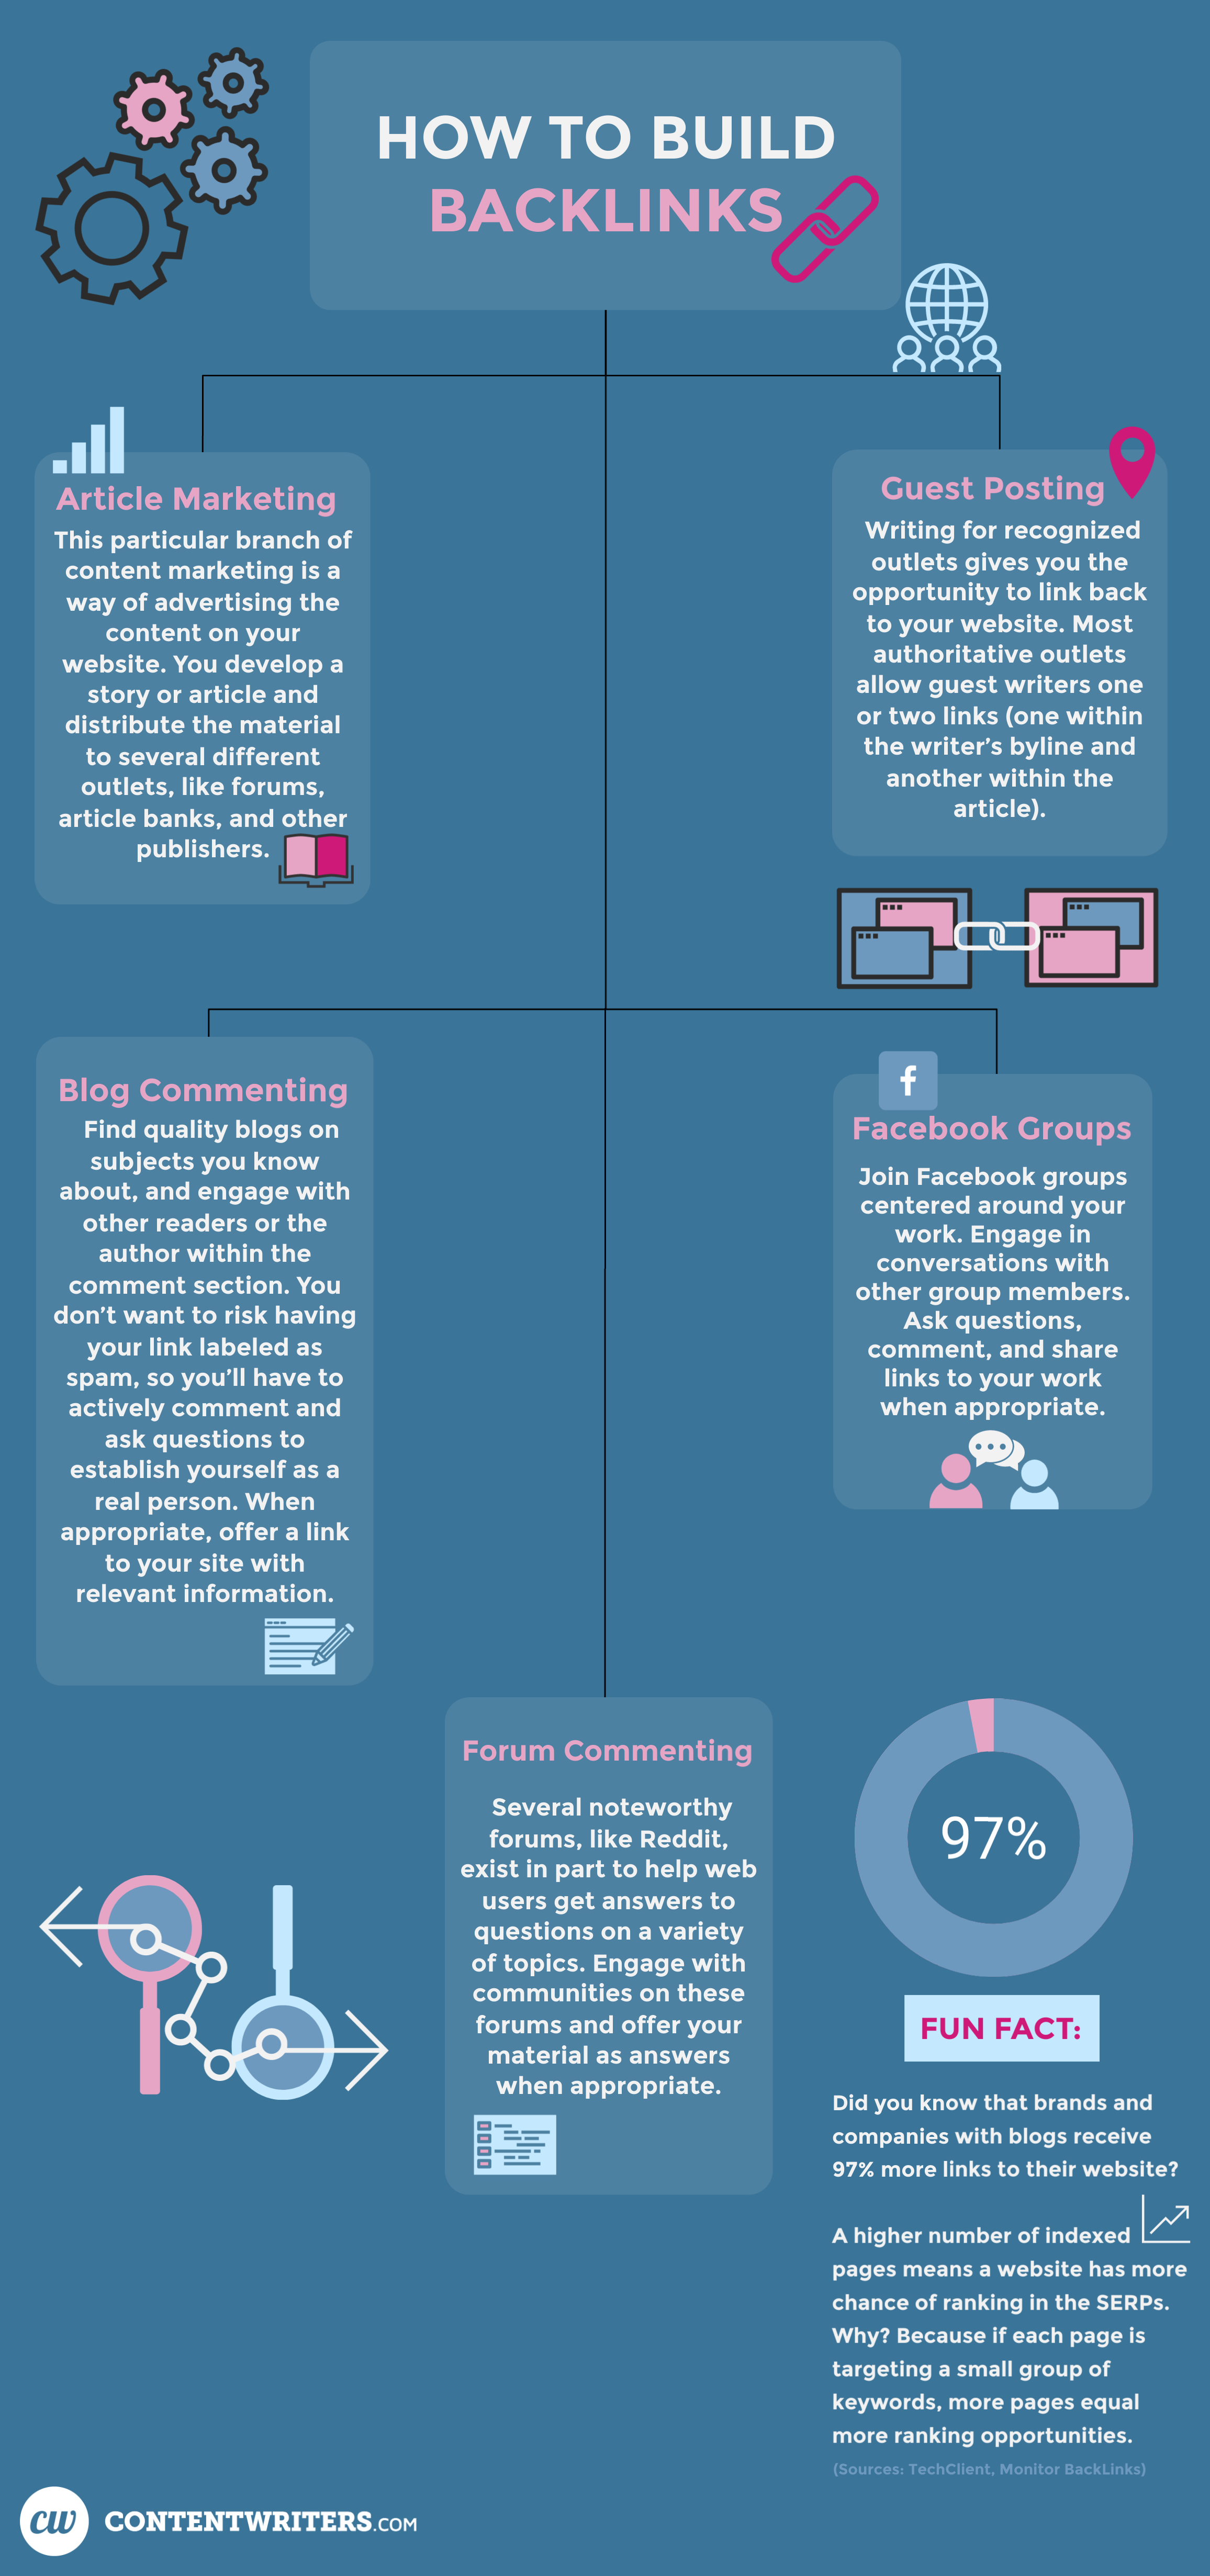 How to Build Backlinks Infographic ContentWriters